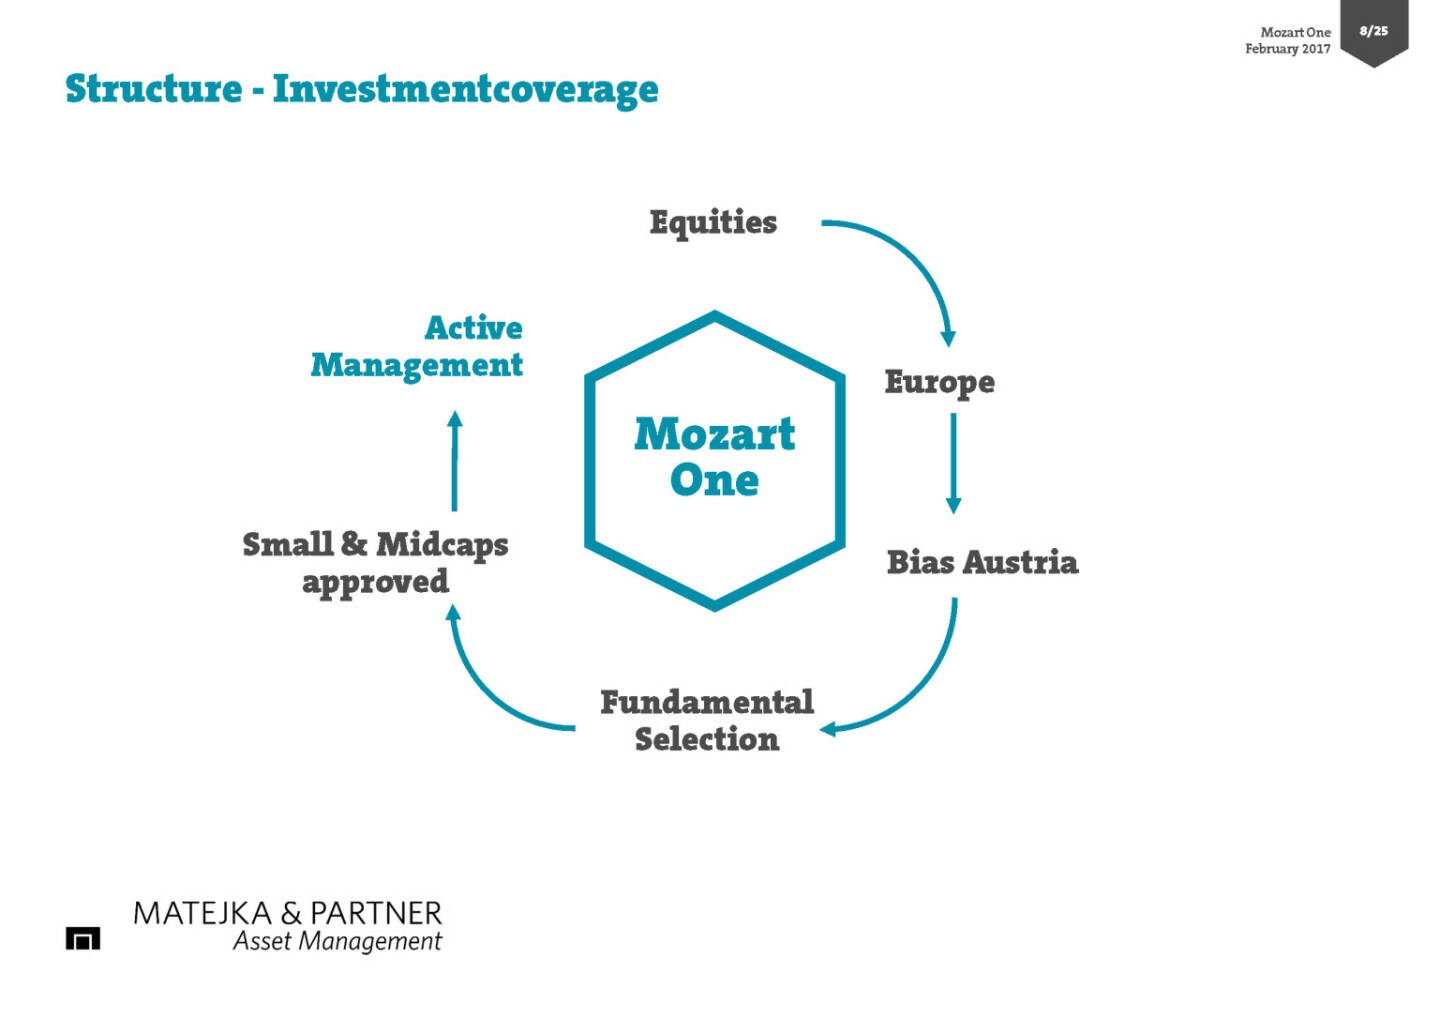 Structure - Investmentcoverage